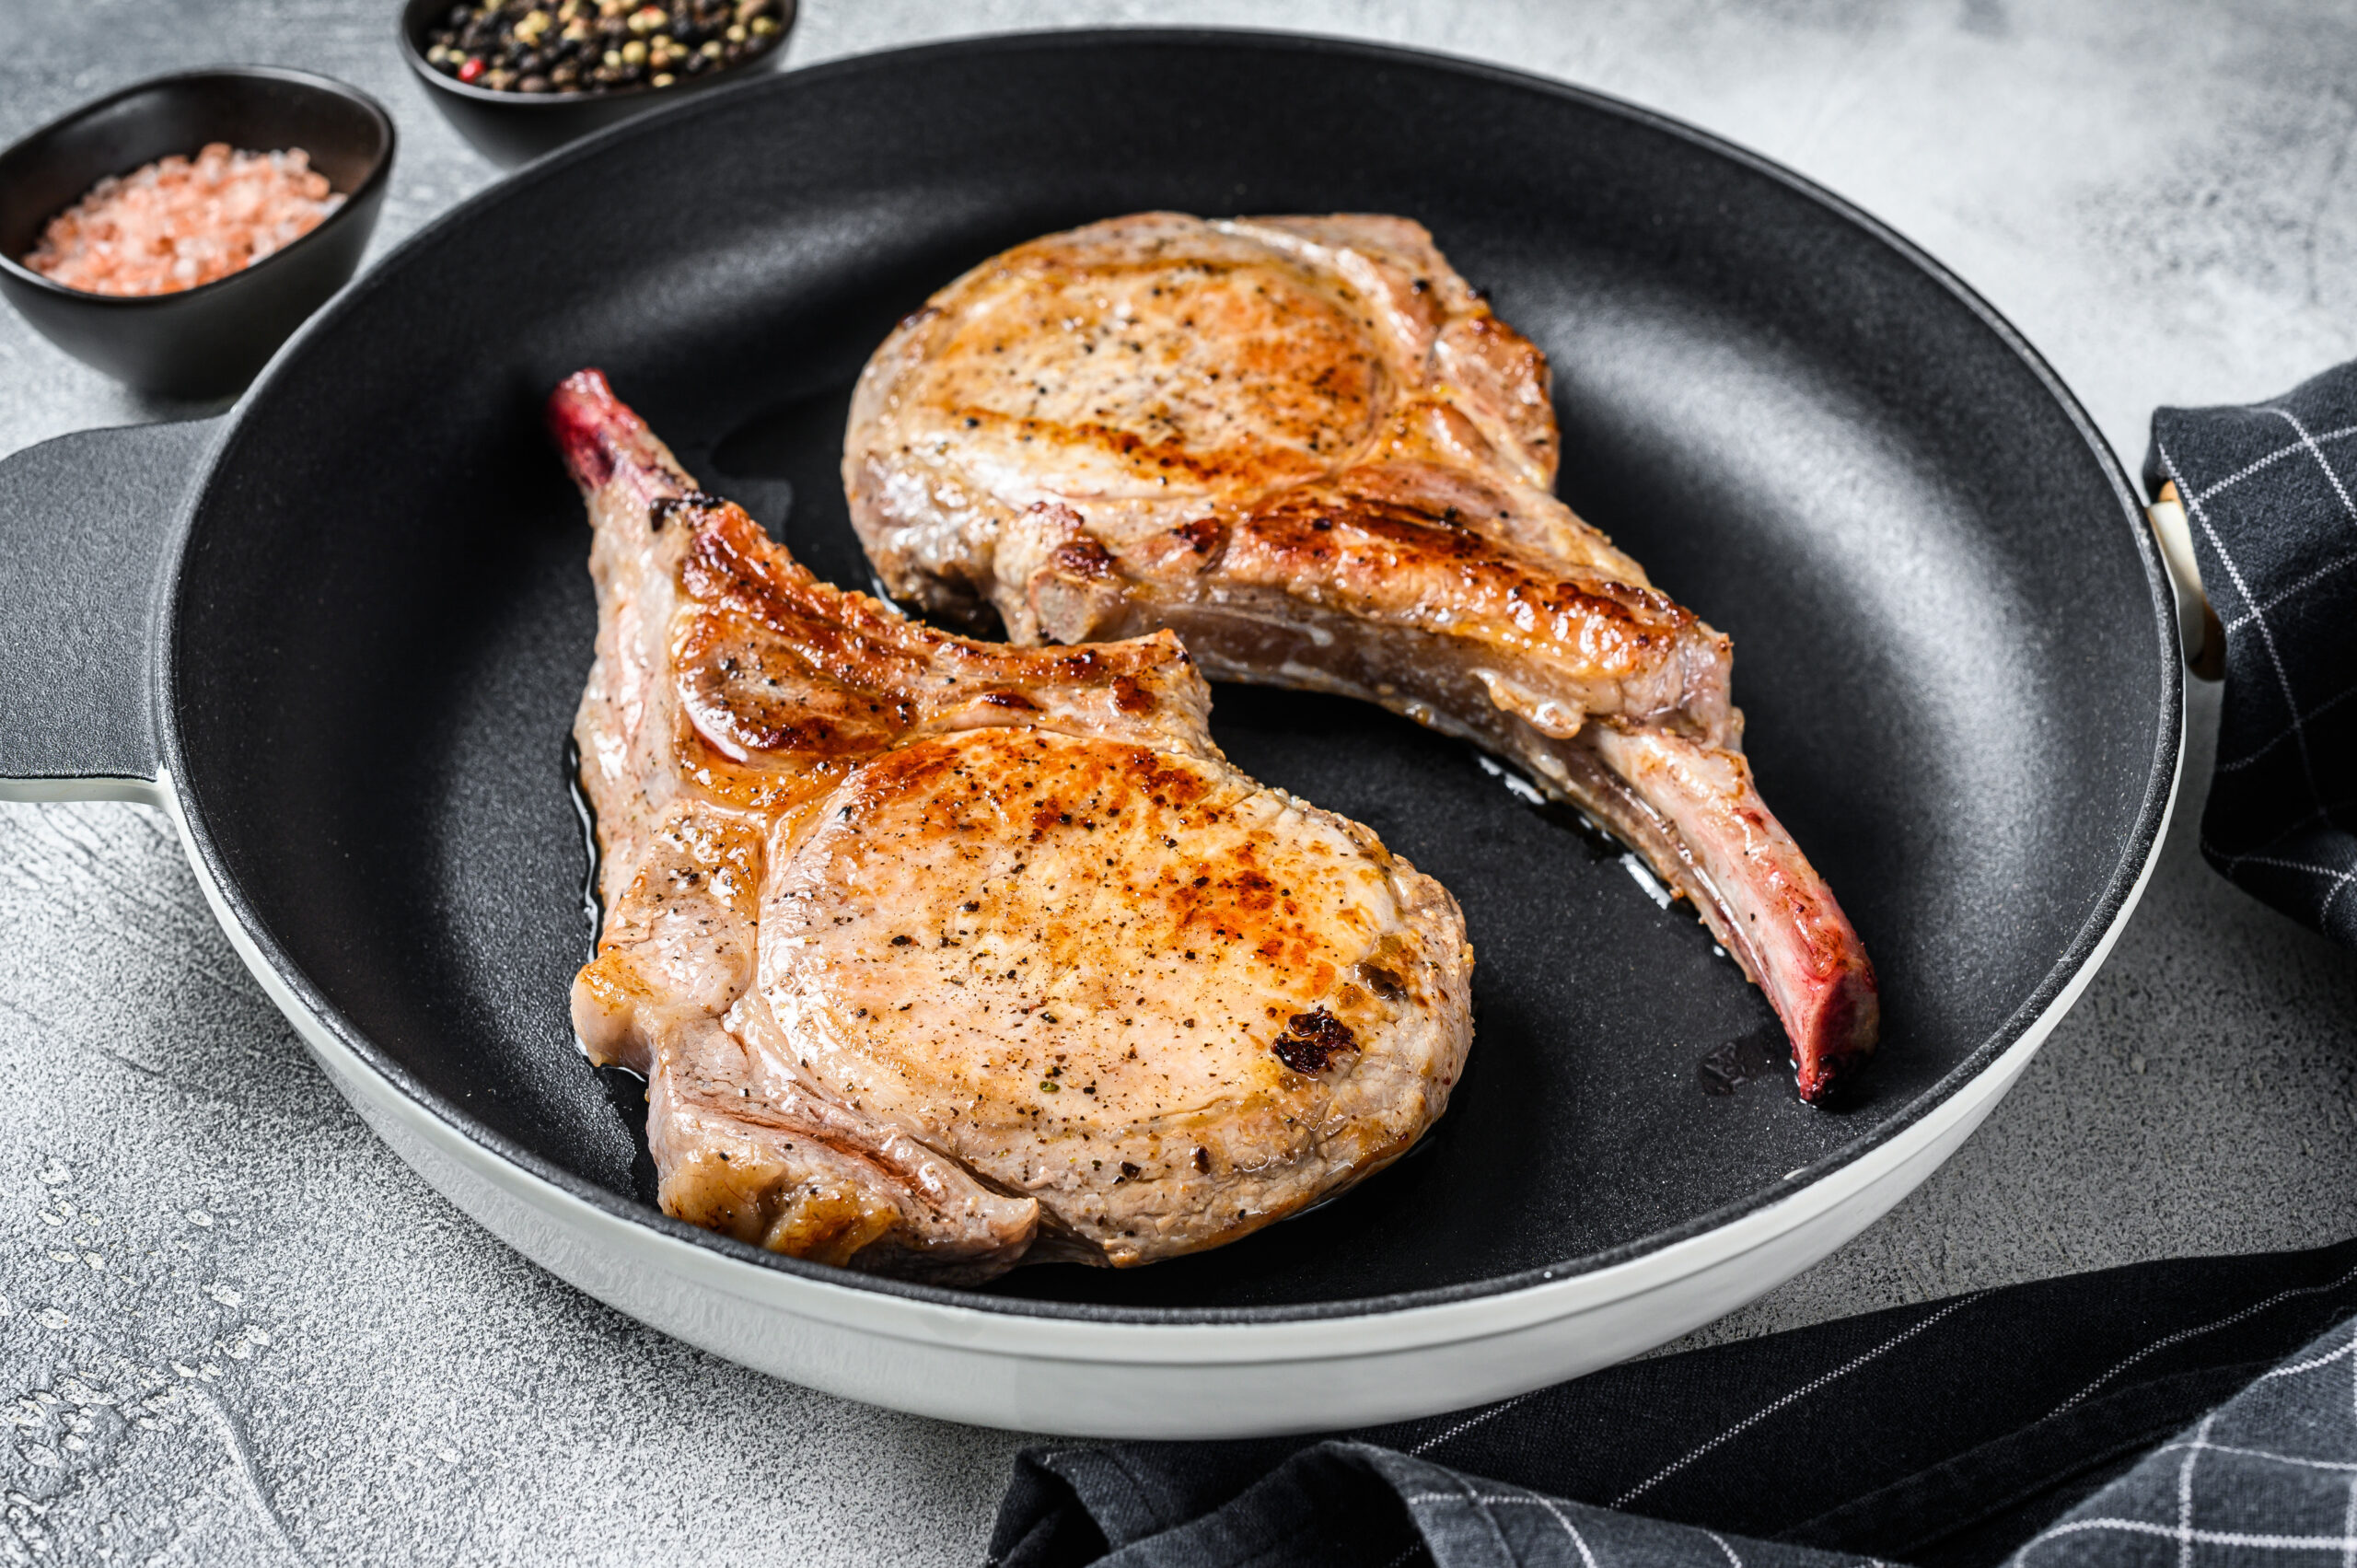 How to Cook Pork Chops in a Skillet